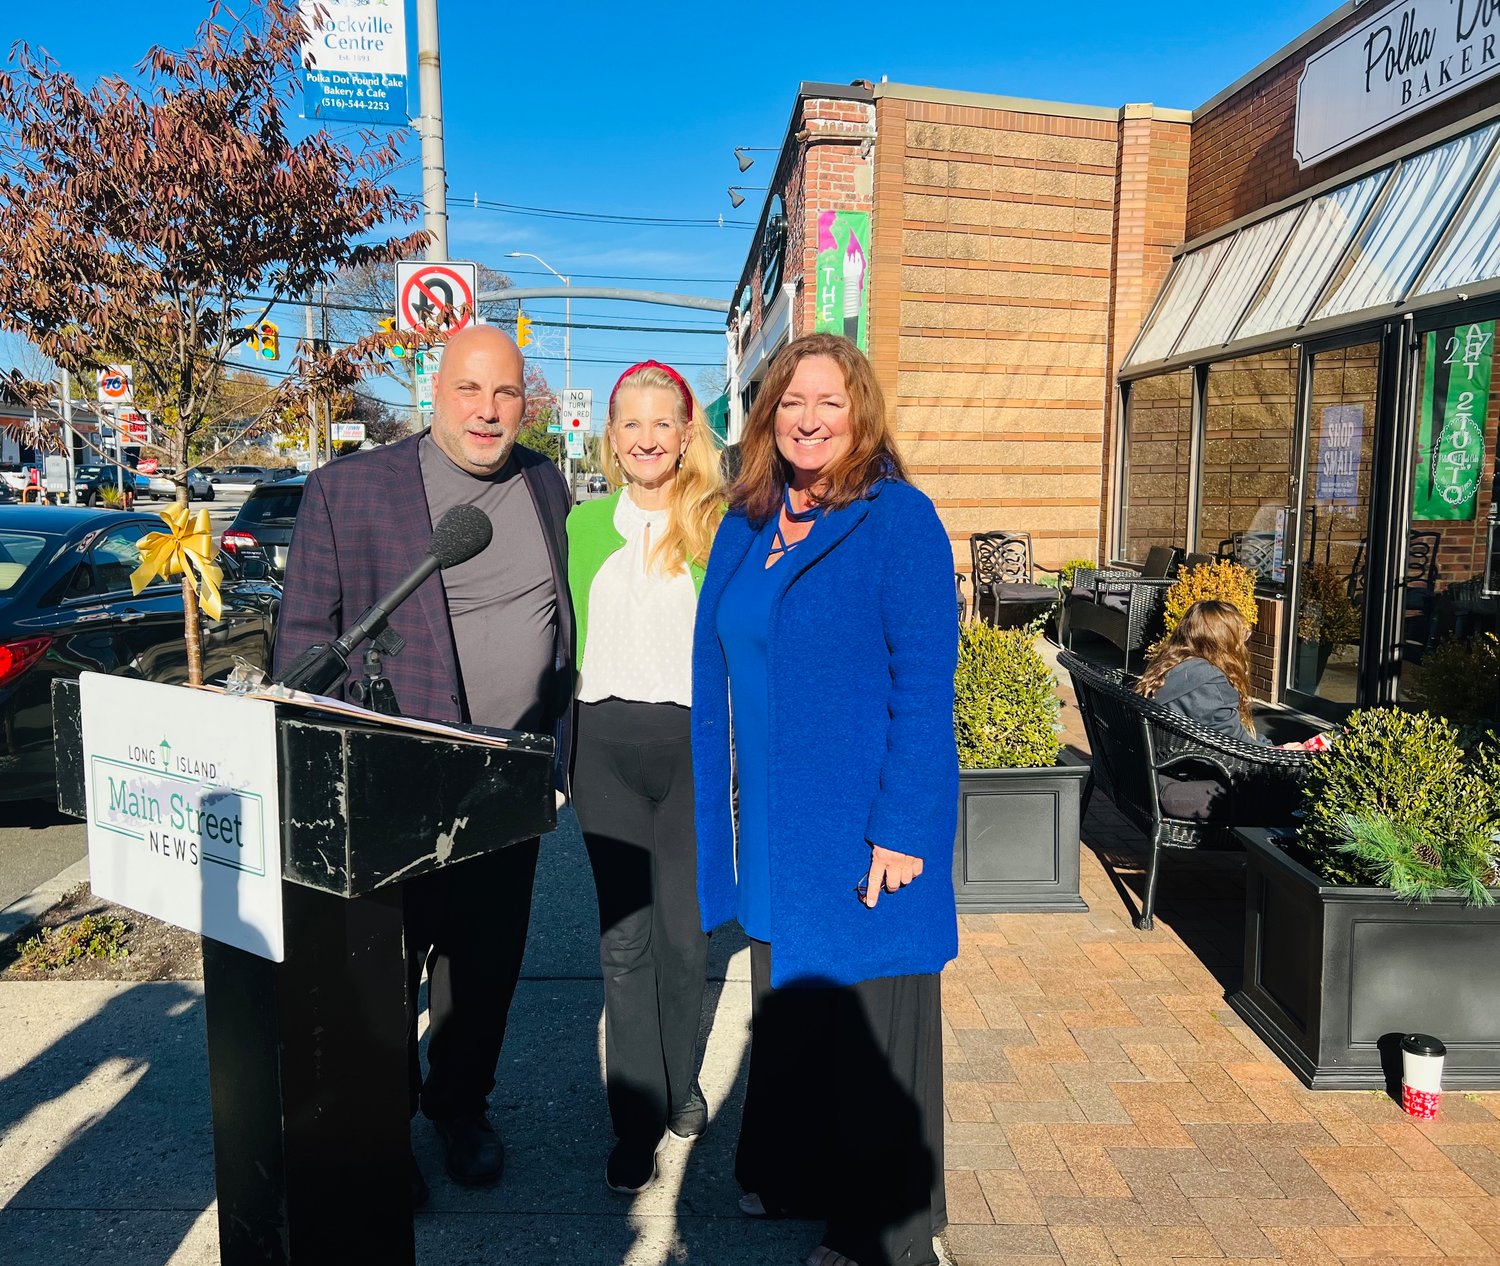 Eric Alexander, president of Vision Long Island, Lisa Unmansky, president of the Rockville Centre Chamber of Commerce and Lisa Dellipizzi support shopping local.